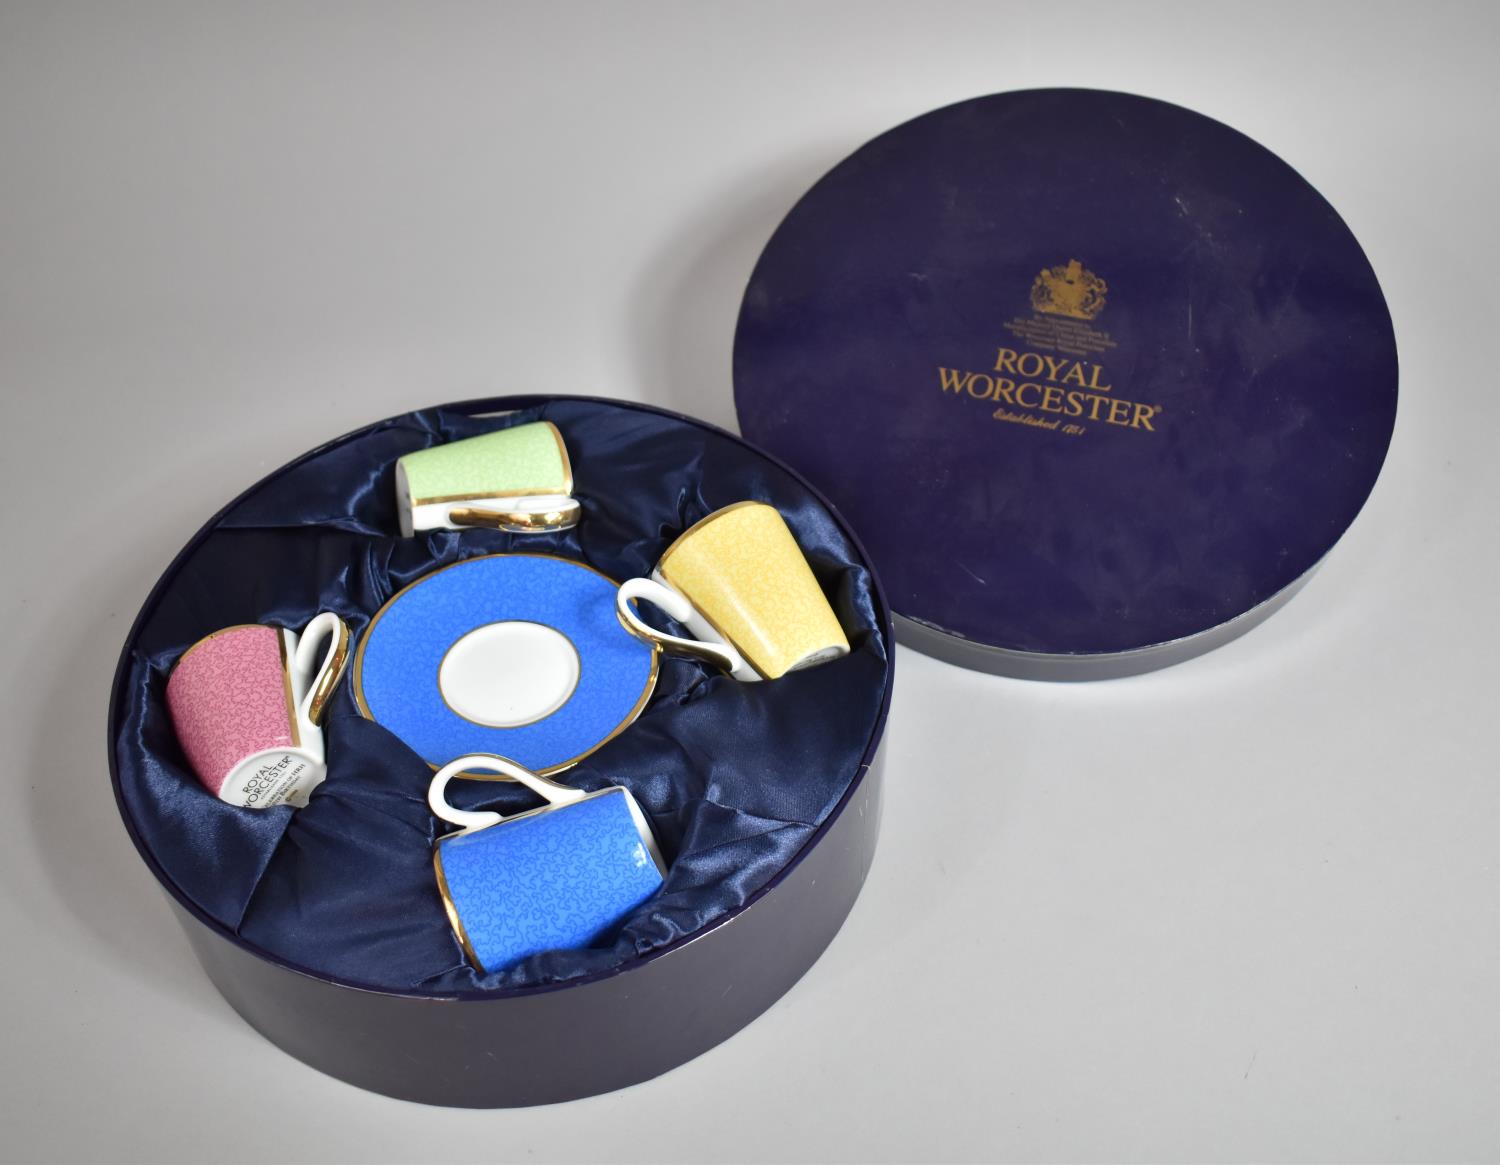 A Boxed Royal Worcester Coffee Set for Four to Celebrate Queen's 80th Birthday